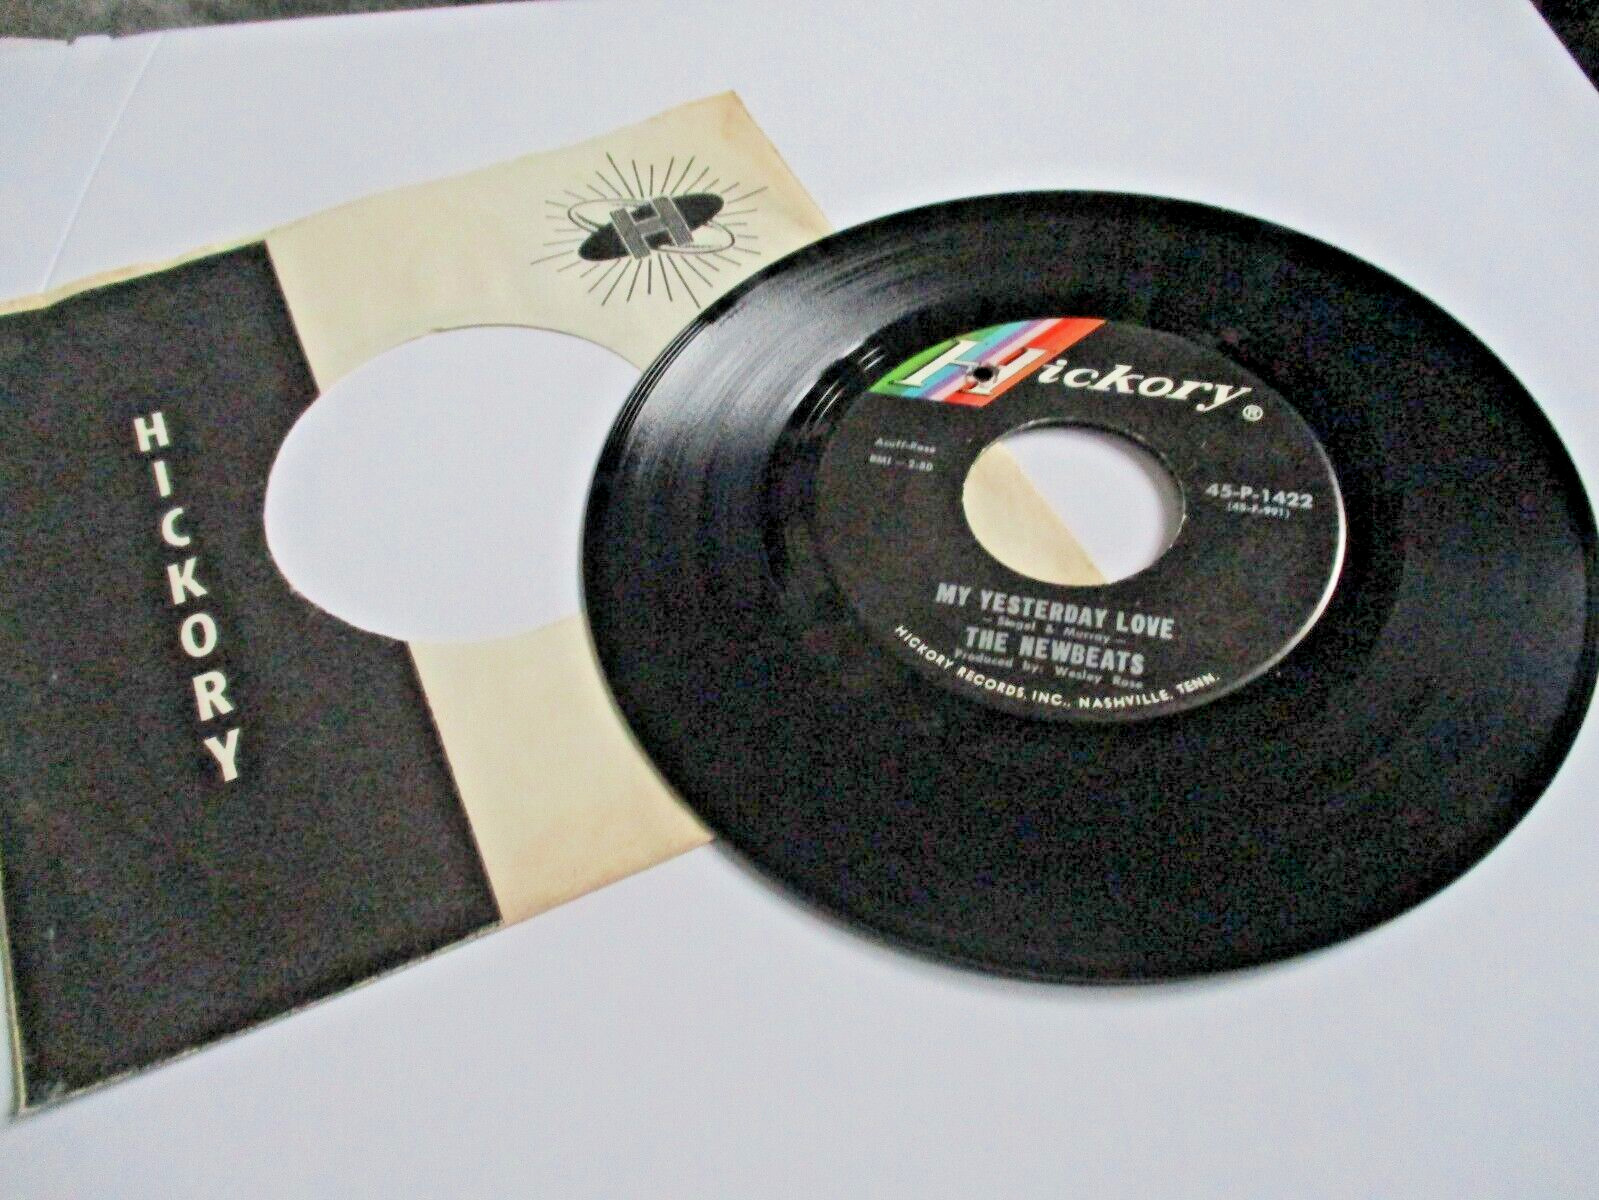 THE NEWBEATS  MY YESTERDAY LOVE c/w A PATENT OF LOVE 1966 US HICKORY No 45P-1422